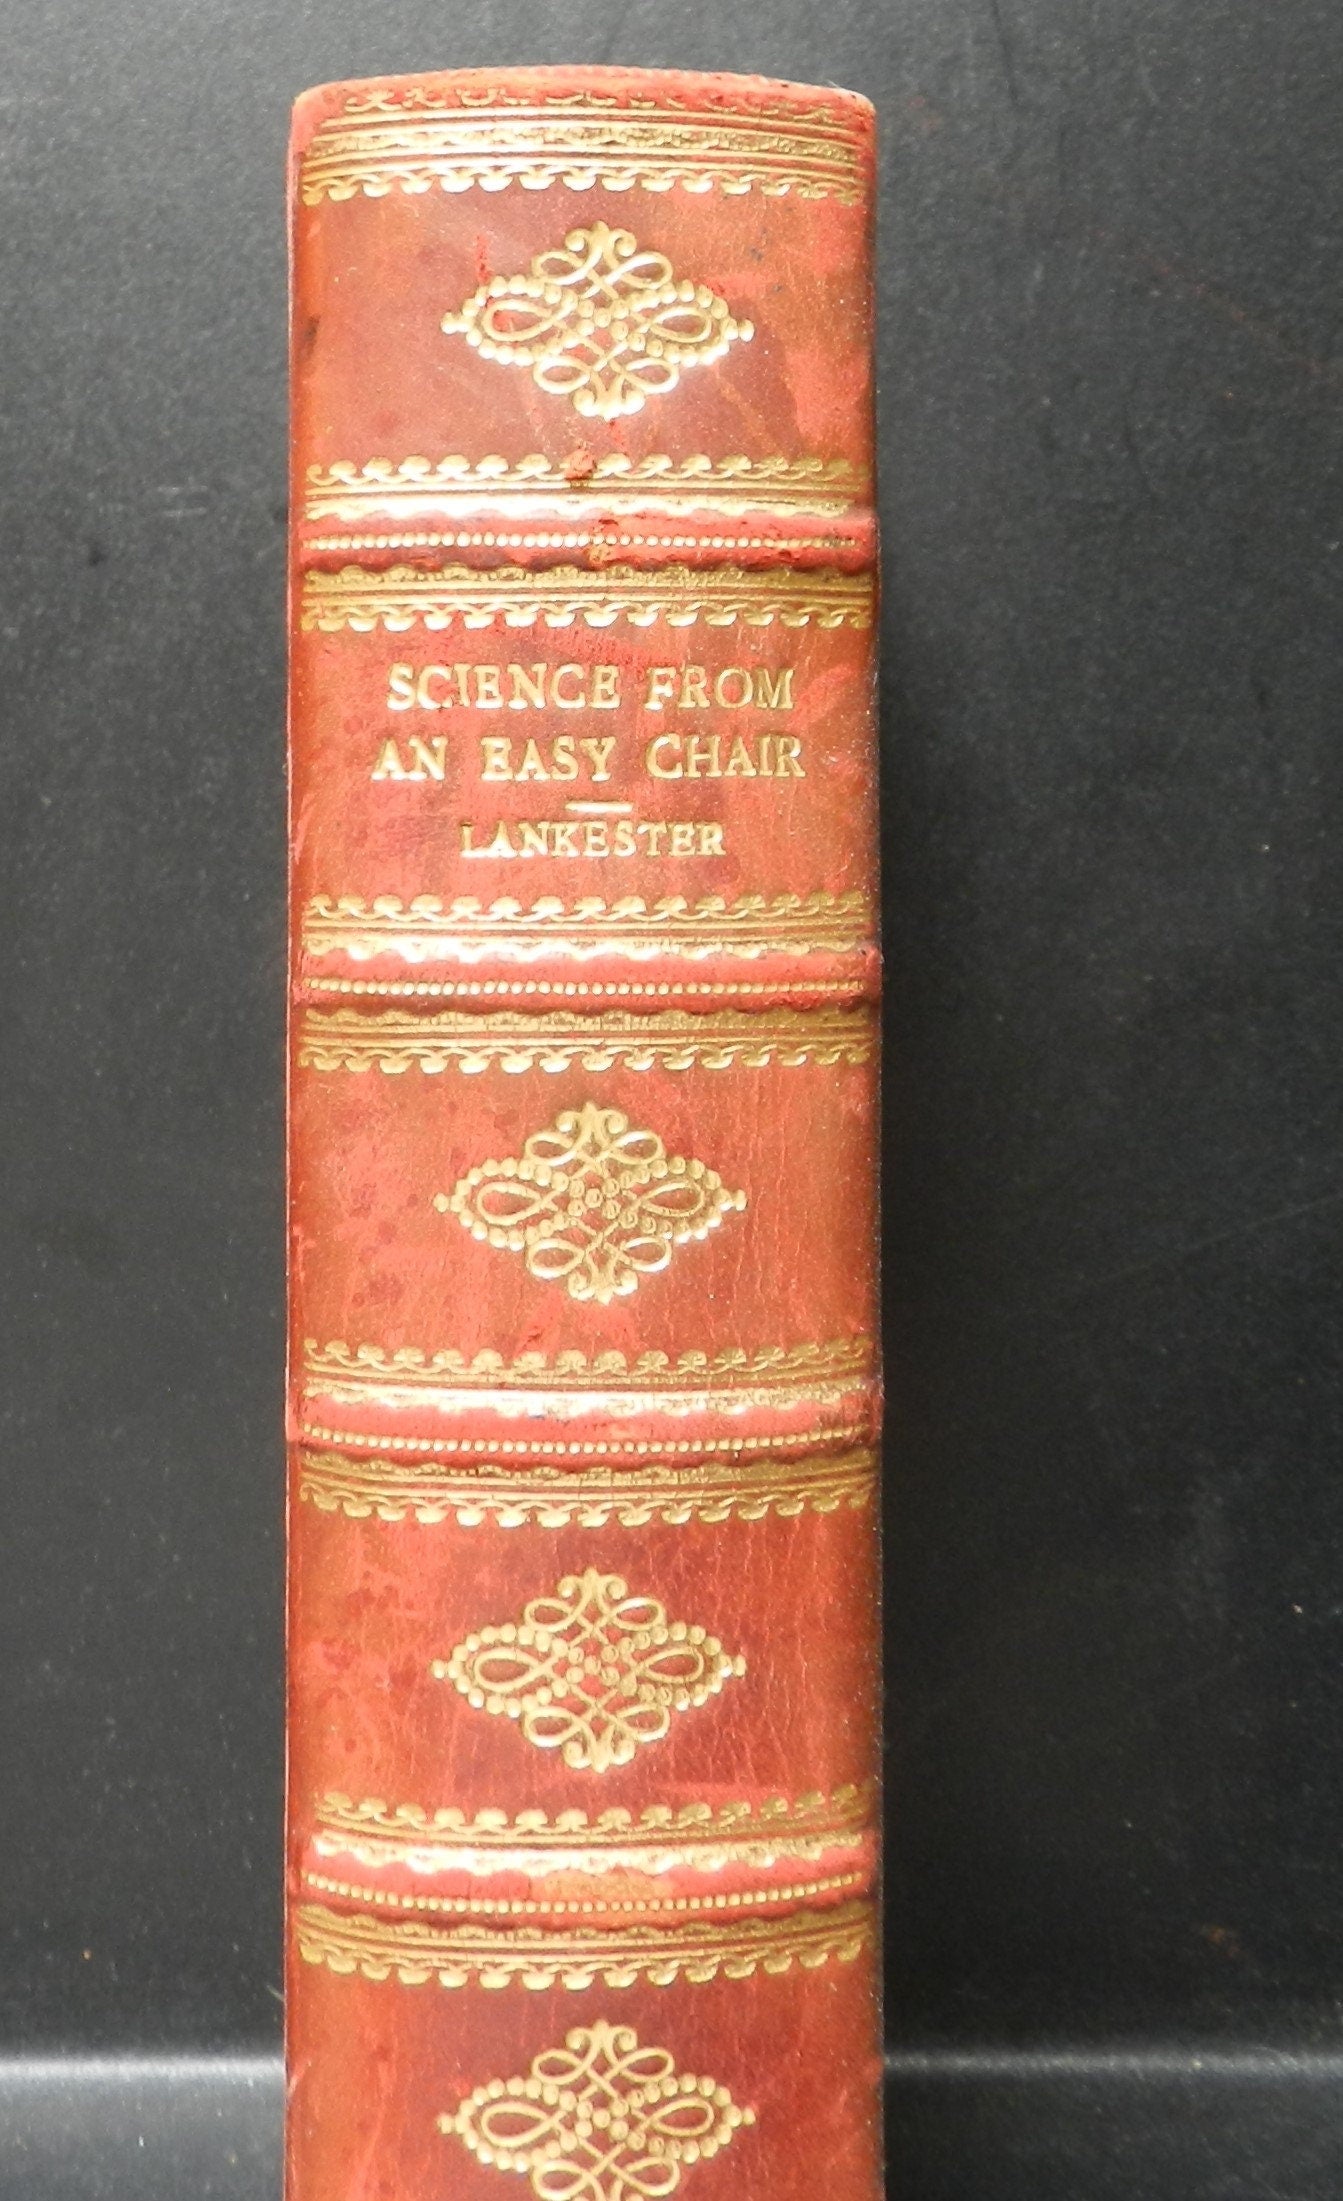 Antique Leather Bound Book "Science From An Easy Chair" by Sir Ray Lankester, 1920